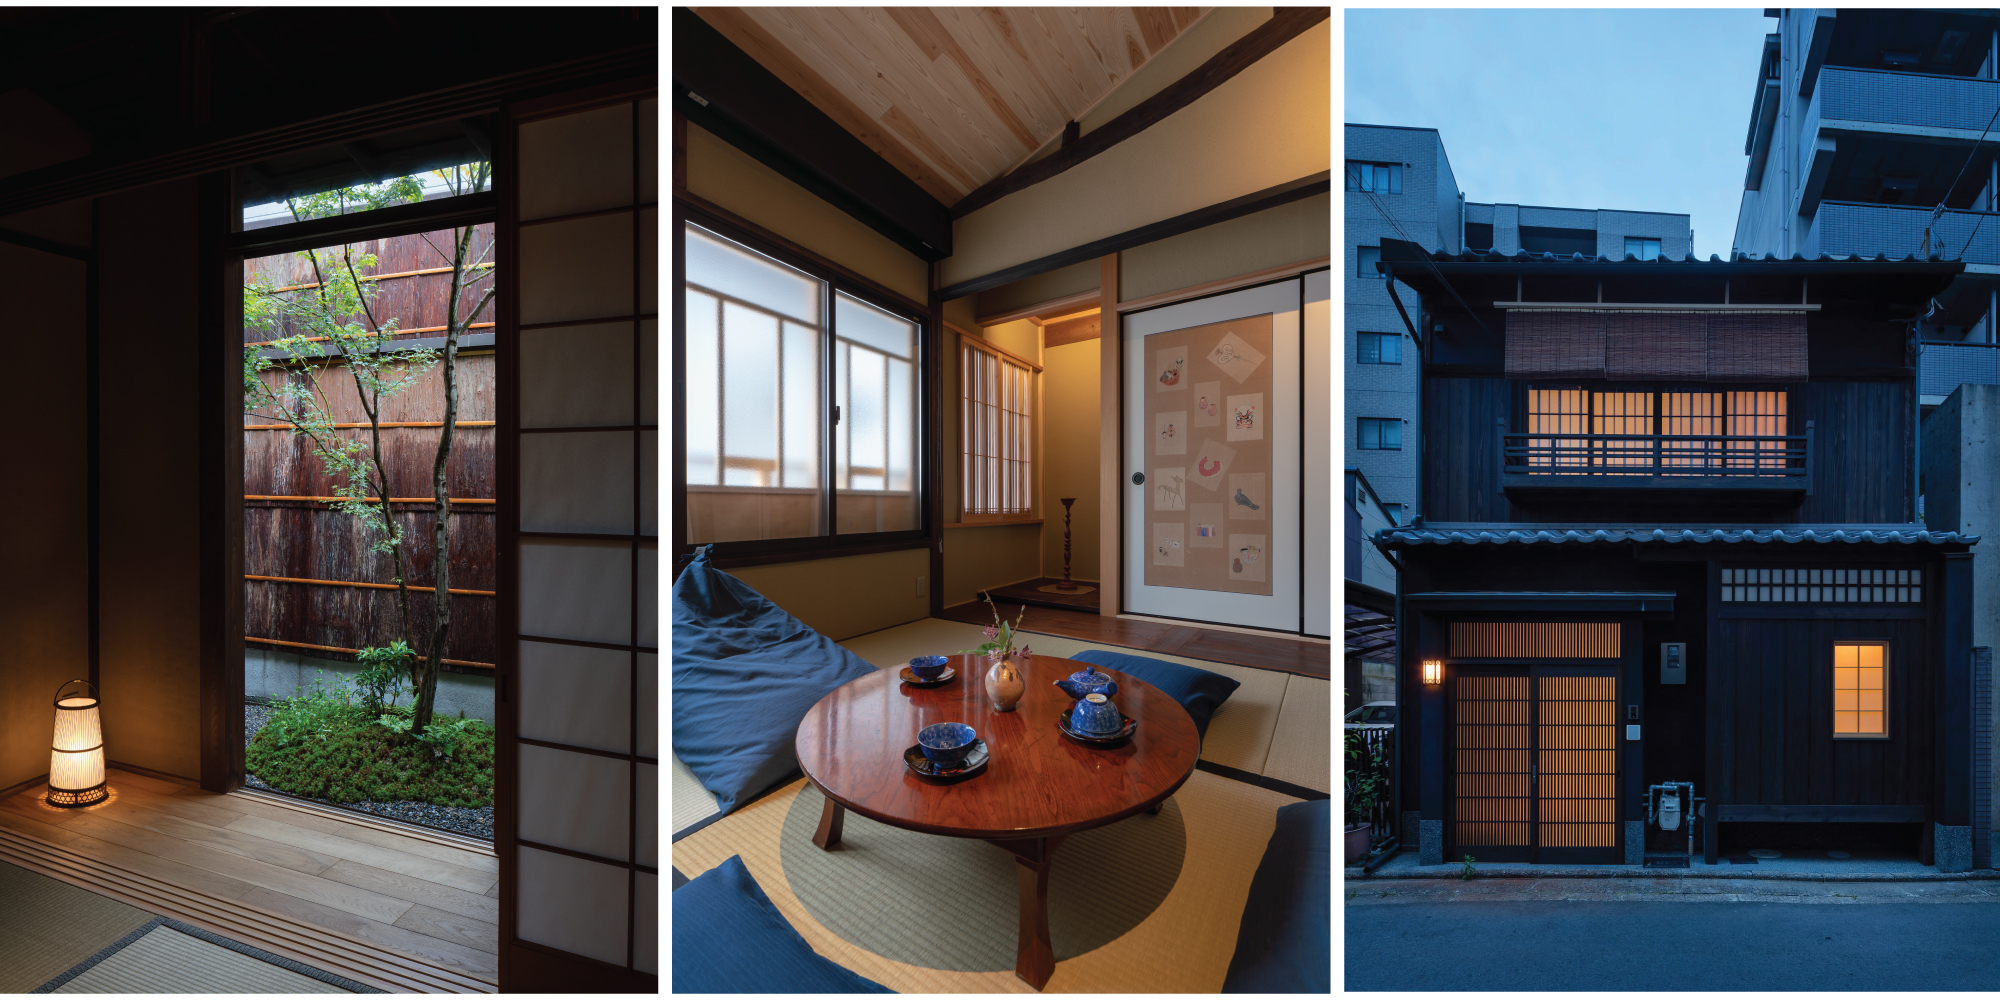 Traditional Japanese machiya townhouses that you can rent and stay in.